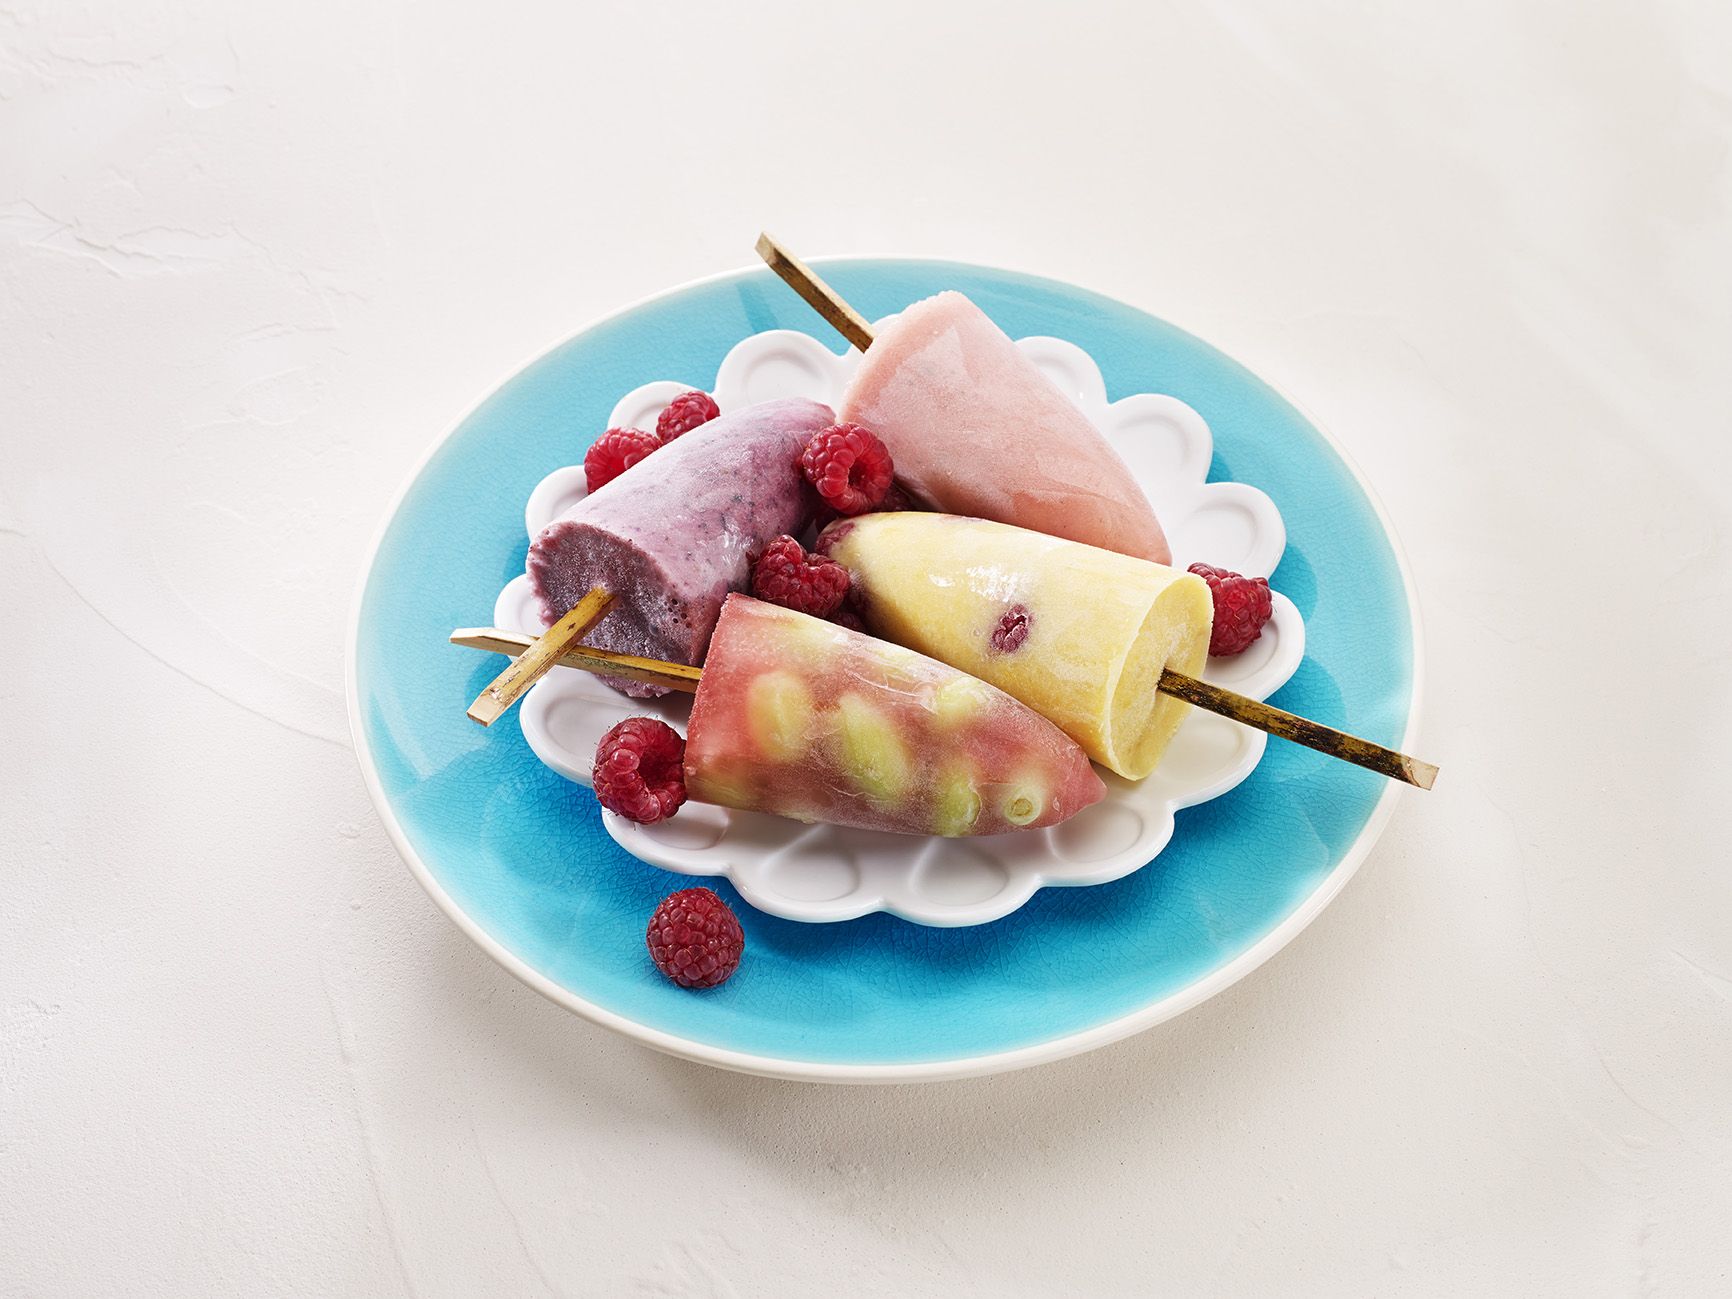 Four icepoles sitting on a light blue plate. Each icypole has a different colour. A few raspberries are scattered on the plate. 